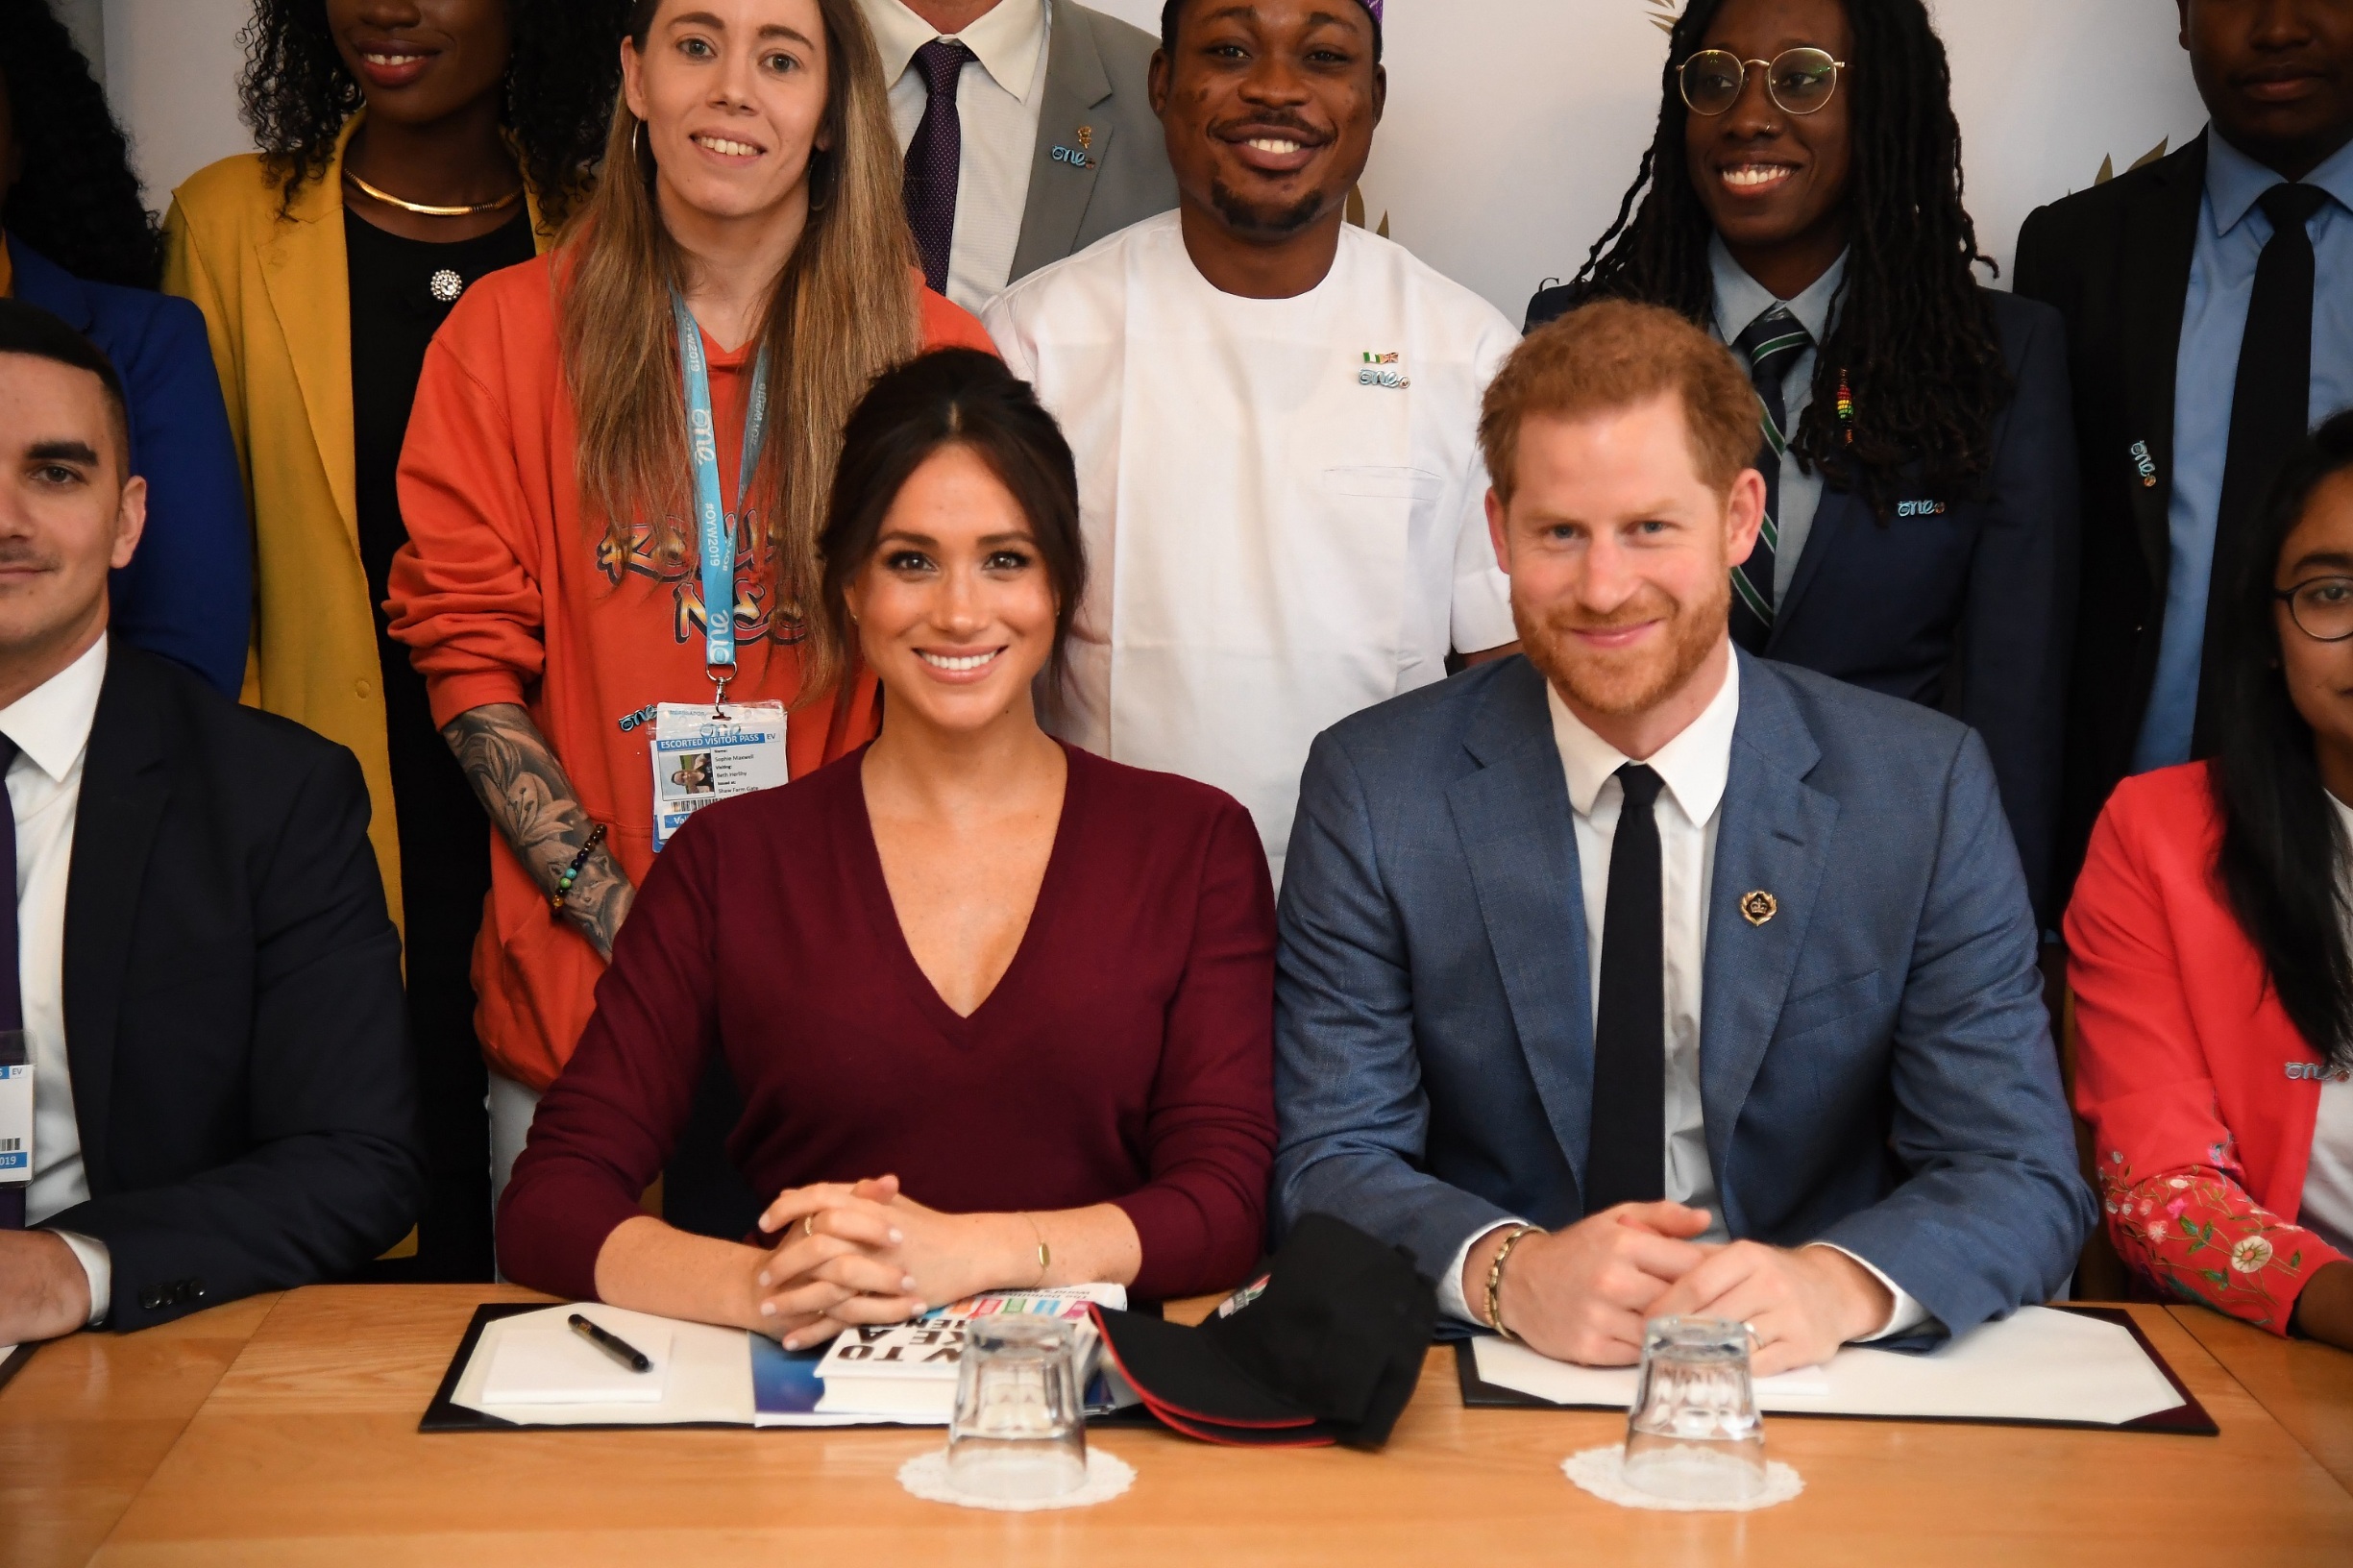 WINDSOR, UNITED KINGDOM - OCTOBER 25:  Meghan, Duchess of Sussex and Prince Harry, Duke of Sussex attend a roundtable discussion on gender equality with The Queens Commonwealth Trust (QCT) and One Young World at Windsor Castle on October 25, 2019 in Windsor, England. (Photo by Jeremy Selwyn - WPA Pool/Getty Images)